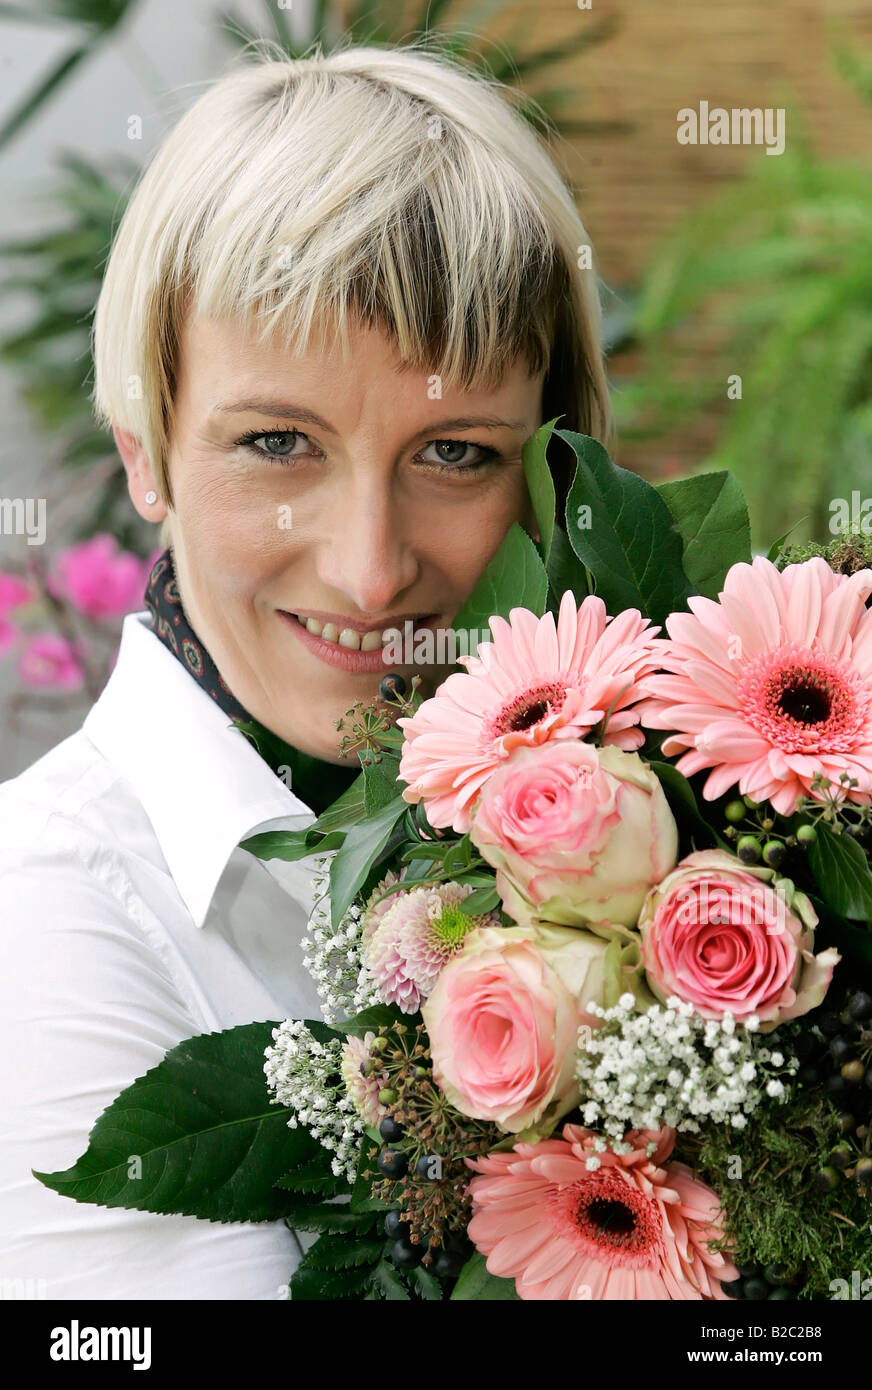 Young woman with a bouquet of flowers Stock Photo